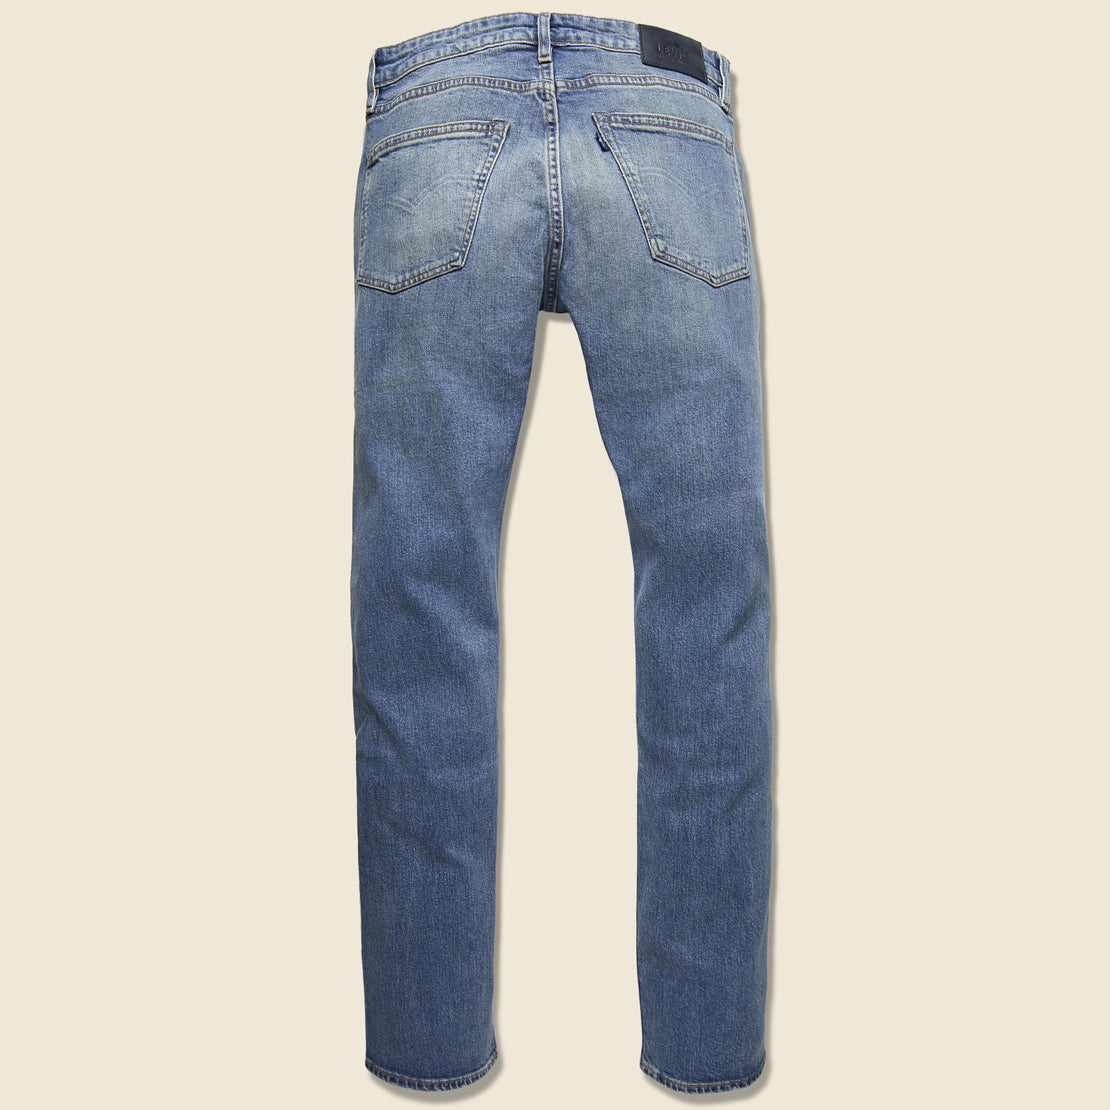 Tack Slim Jean - Mikyo Wash - Levis Made & Crafted - STAG Provisions - Pants - Denim